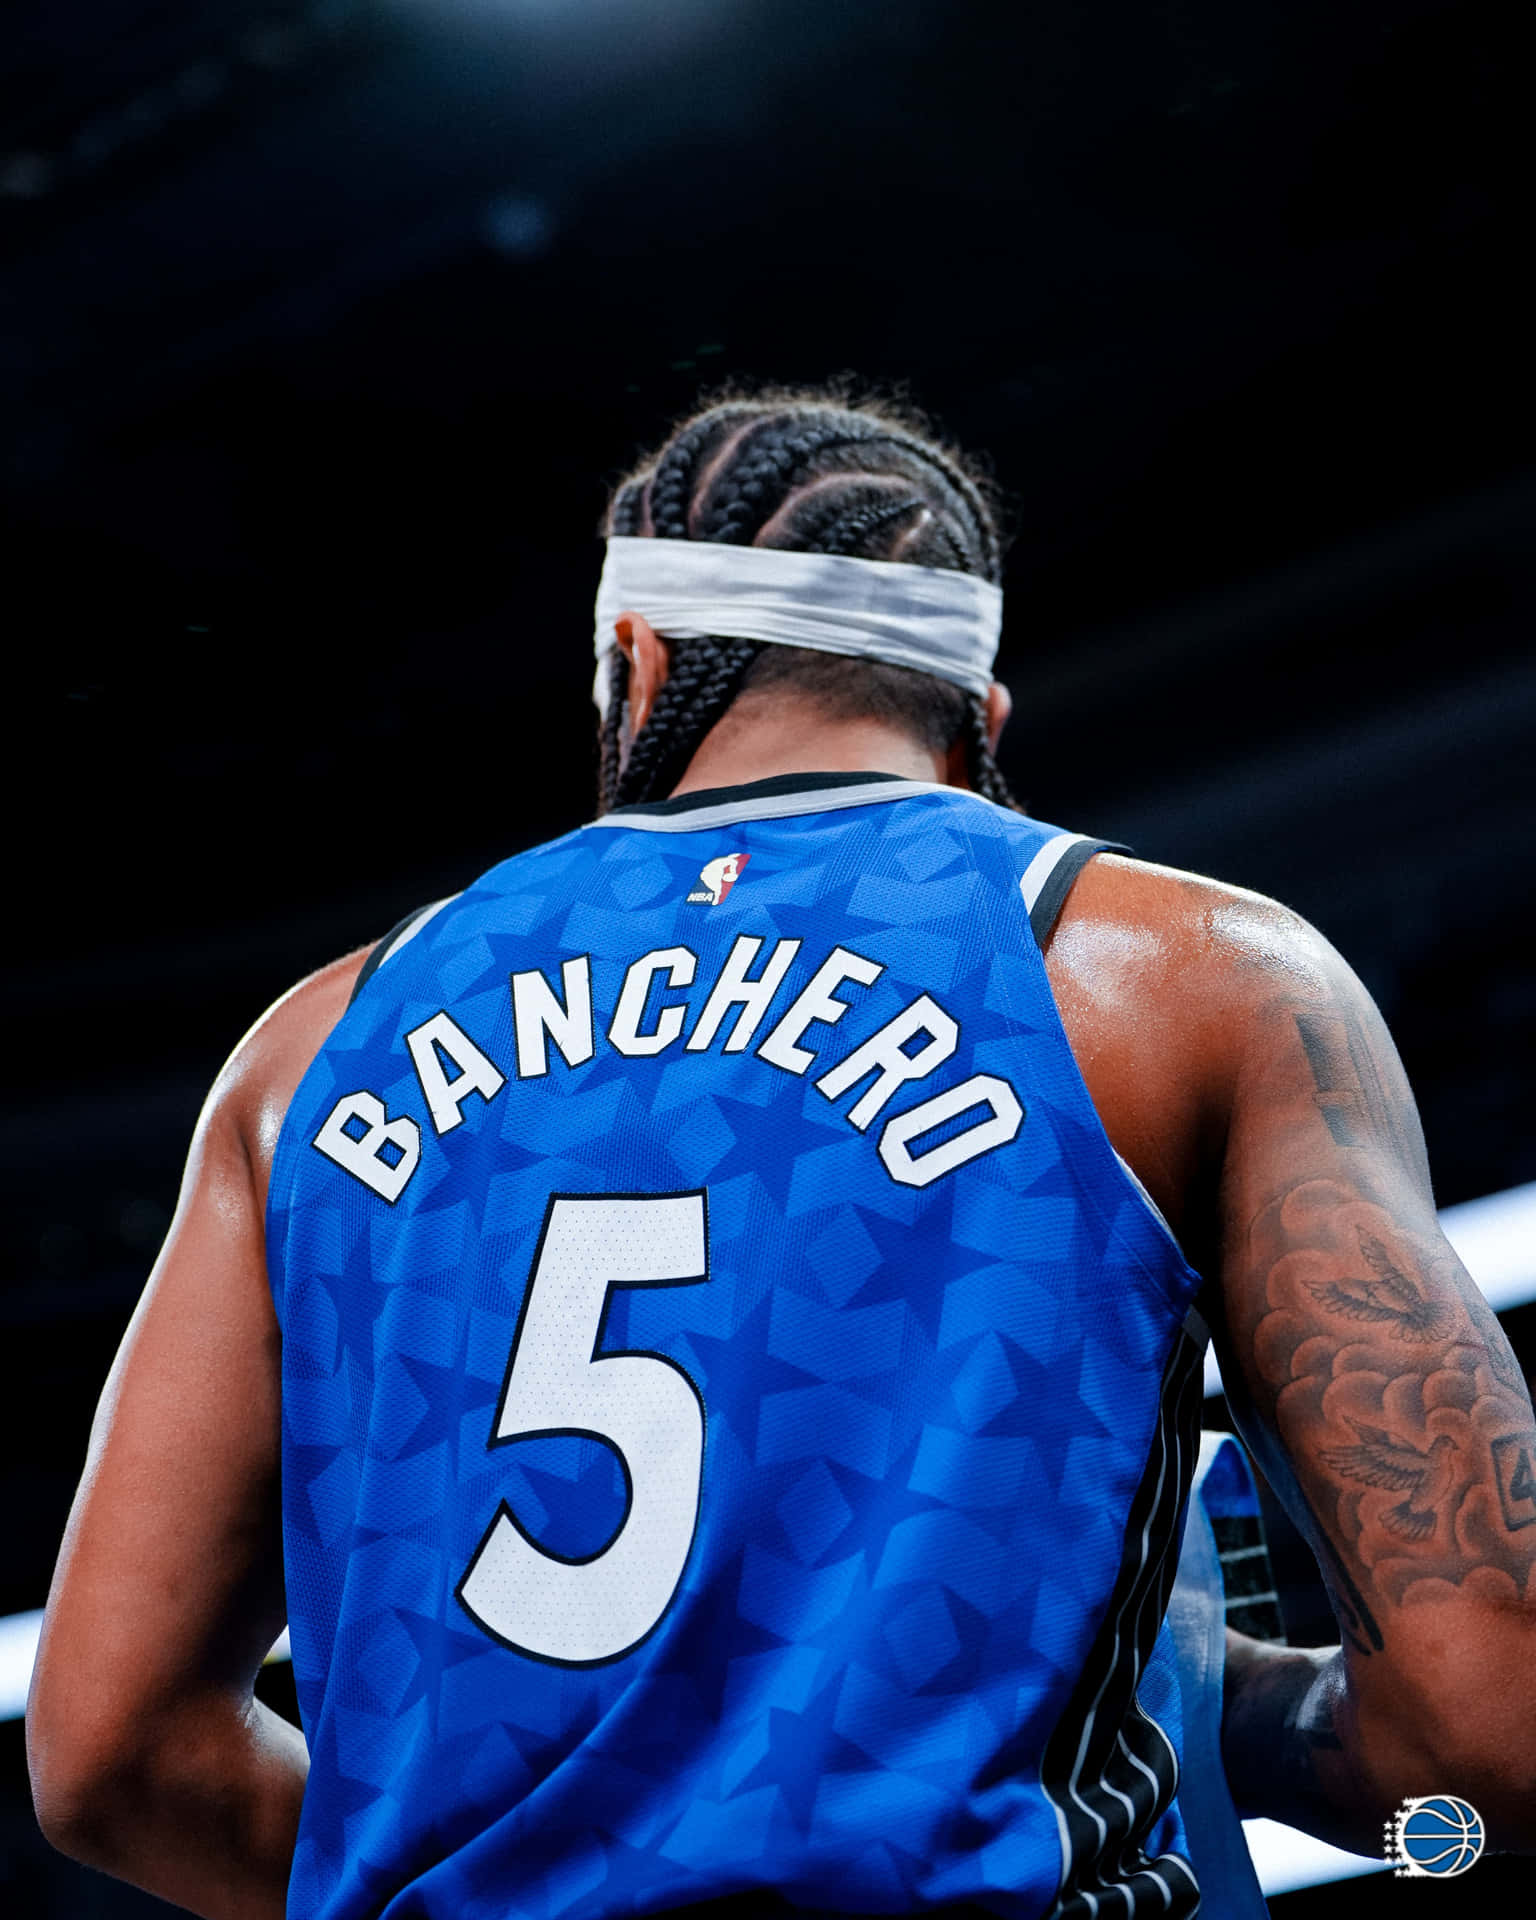 Paolo Banchero Number5 Jersey Wallpaper